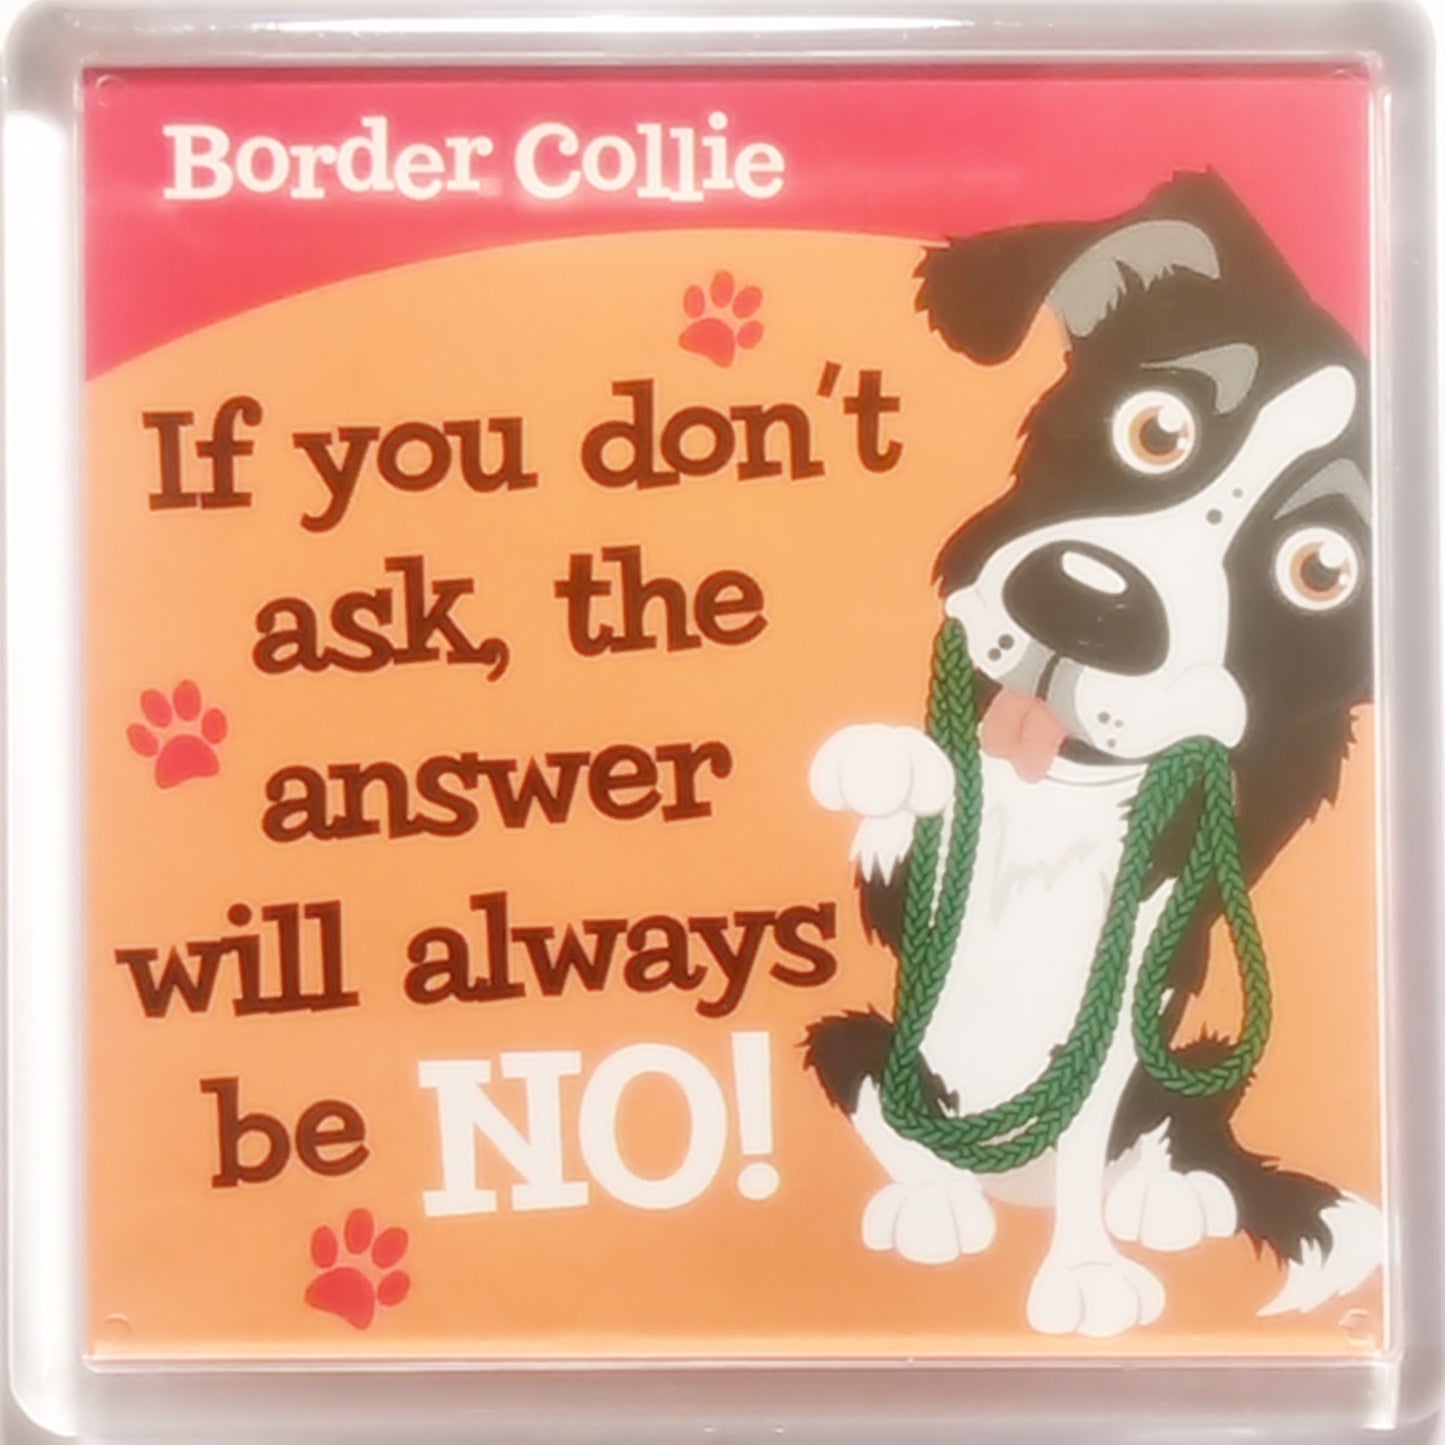 Wags & Whiskers Dog Magnet "Border Collie" by Paper Island